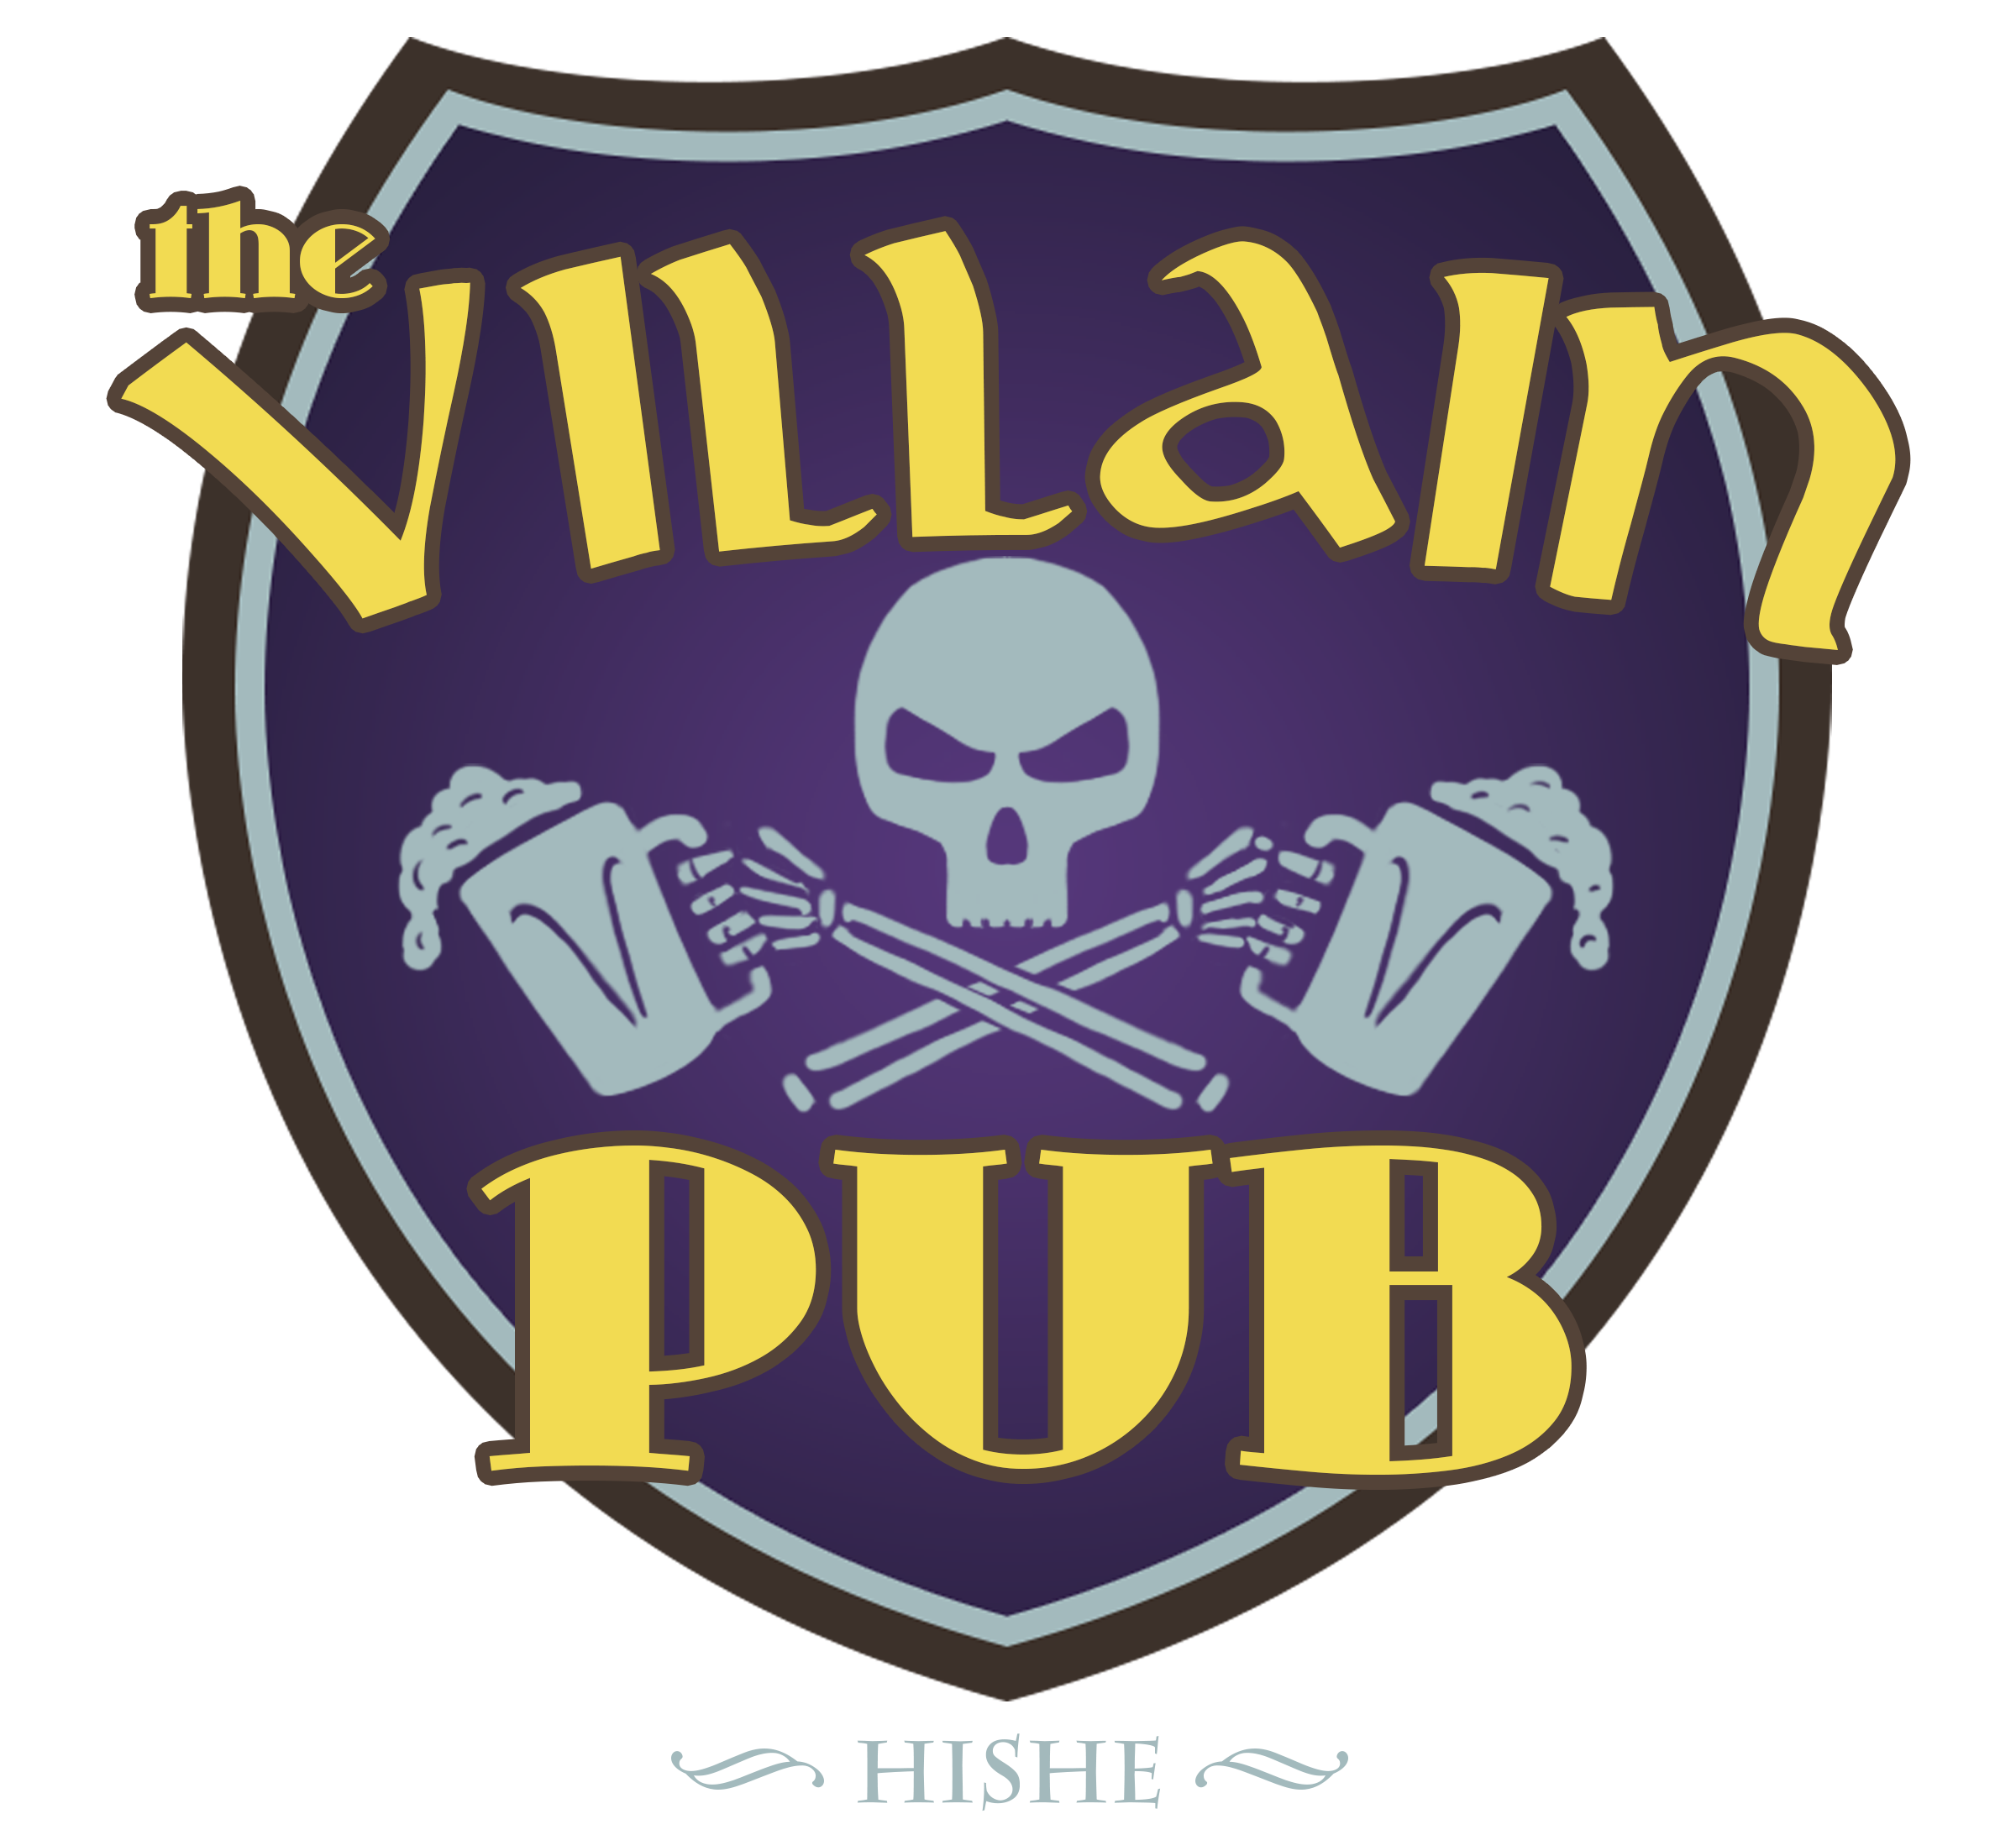 The Villain Pub is coming to life at SDCC 2015!